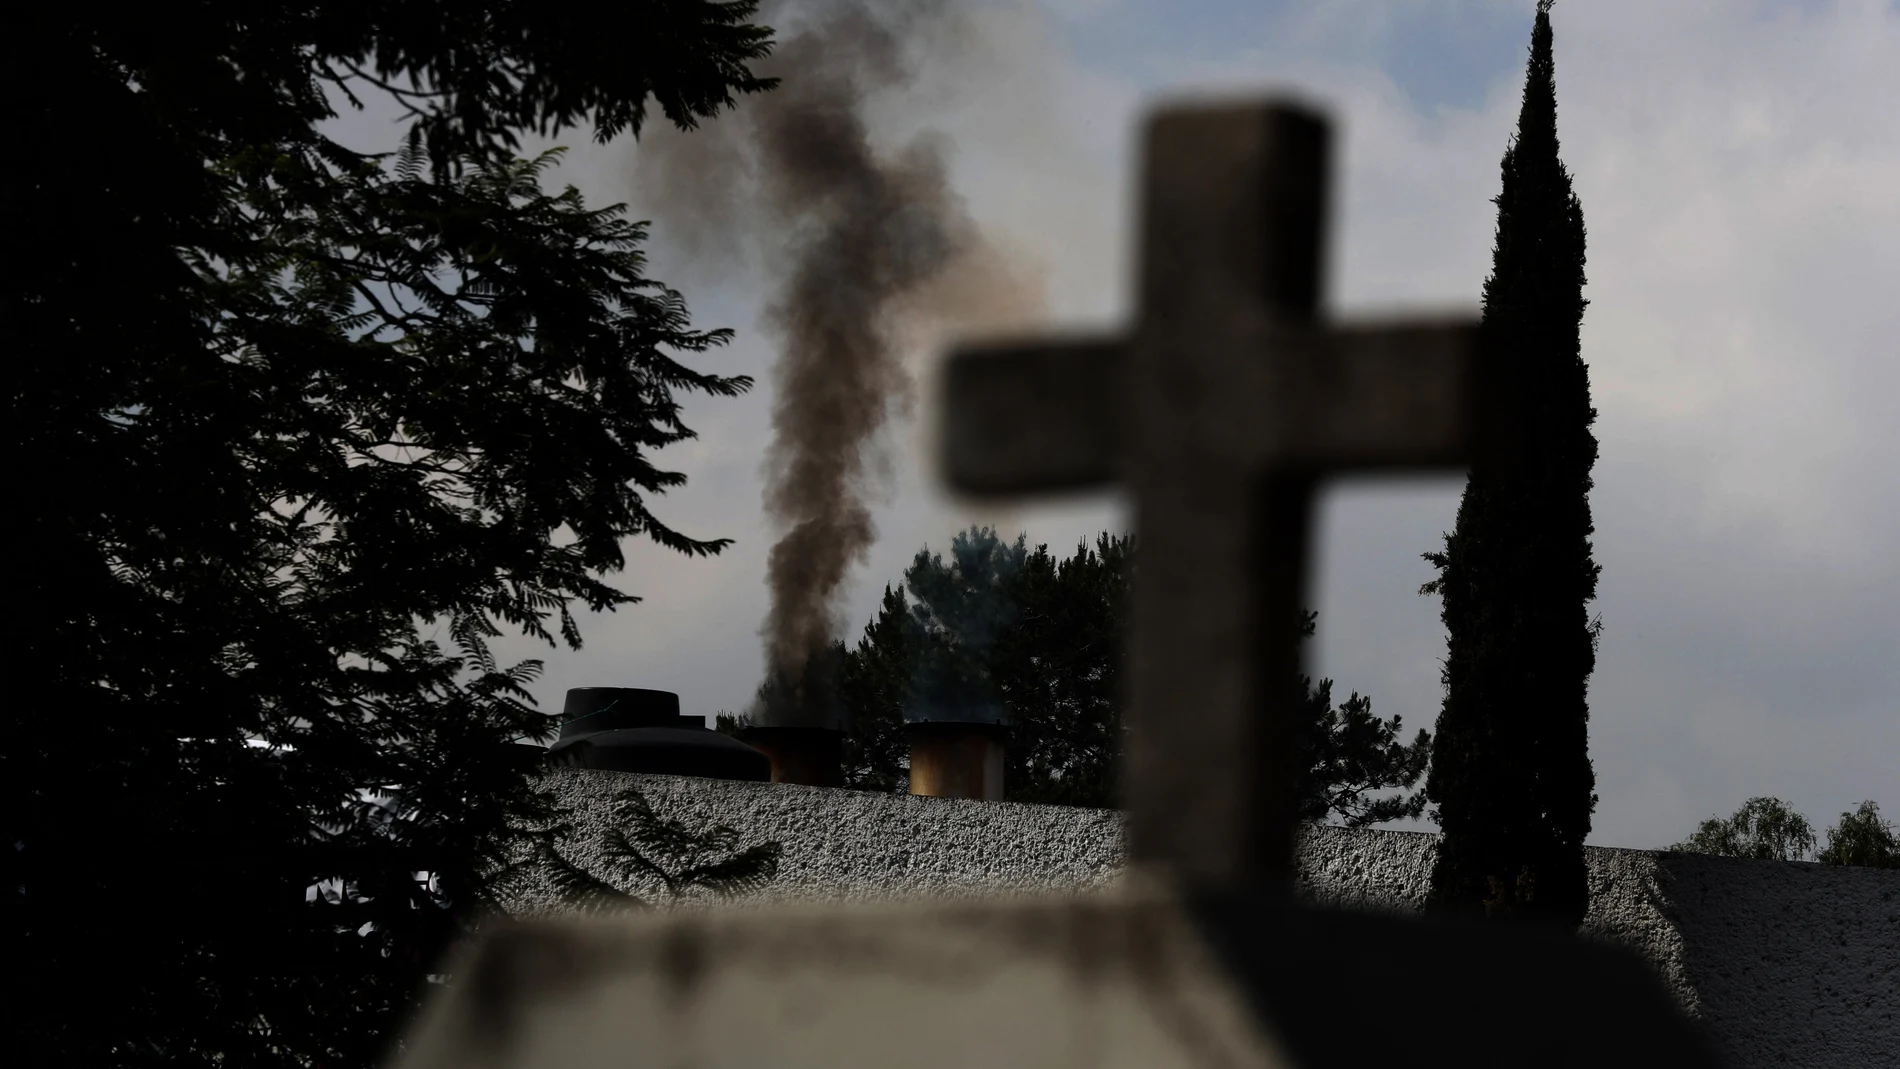 Smoke rises from the crematorium at the PanteÃ³n de San Nicolas Tolentino cemetery in the Iztapalapa neighborhood of Mexico City, Tuesday, June 2, 2020. Funeral parlors and crematoriums in Iztapalapa, a borough of 2 million people, say they have seen their work multiplied with the surging number of dead of COVID-19 in the capital's hardest-hit corner by the new coronavirus. (AP Photo/Marco Ugarte)